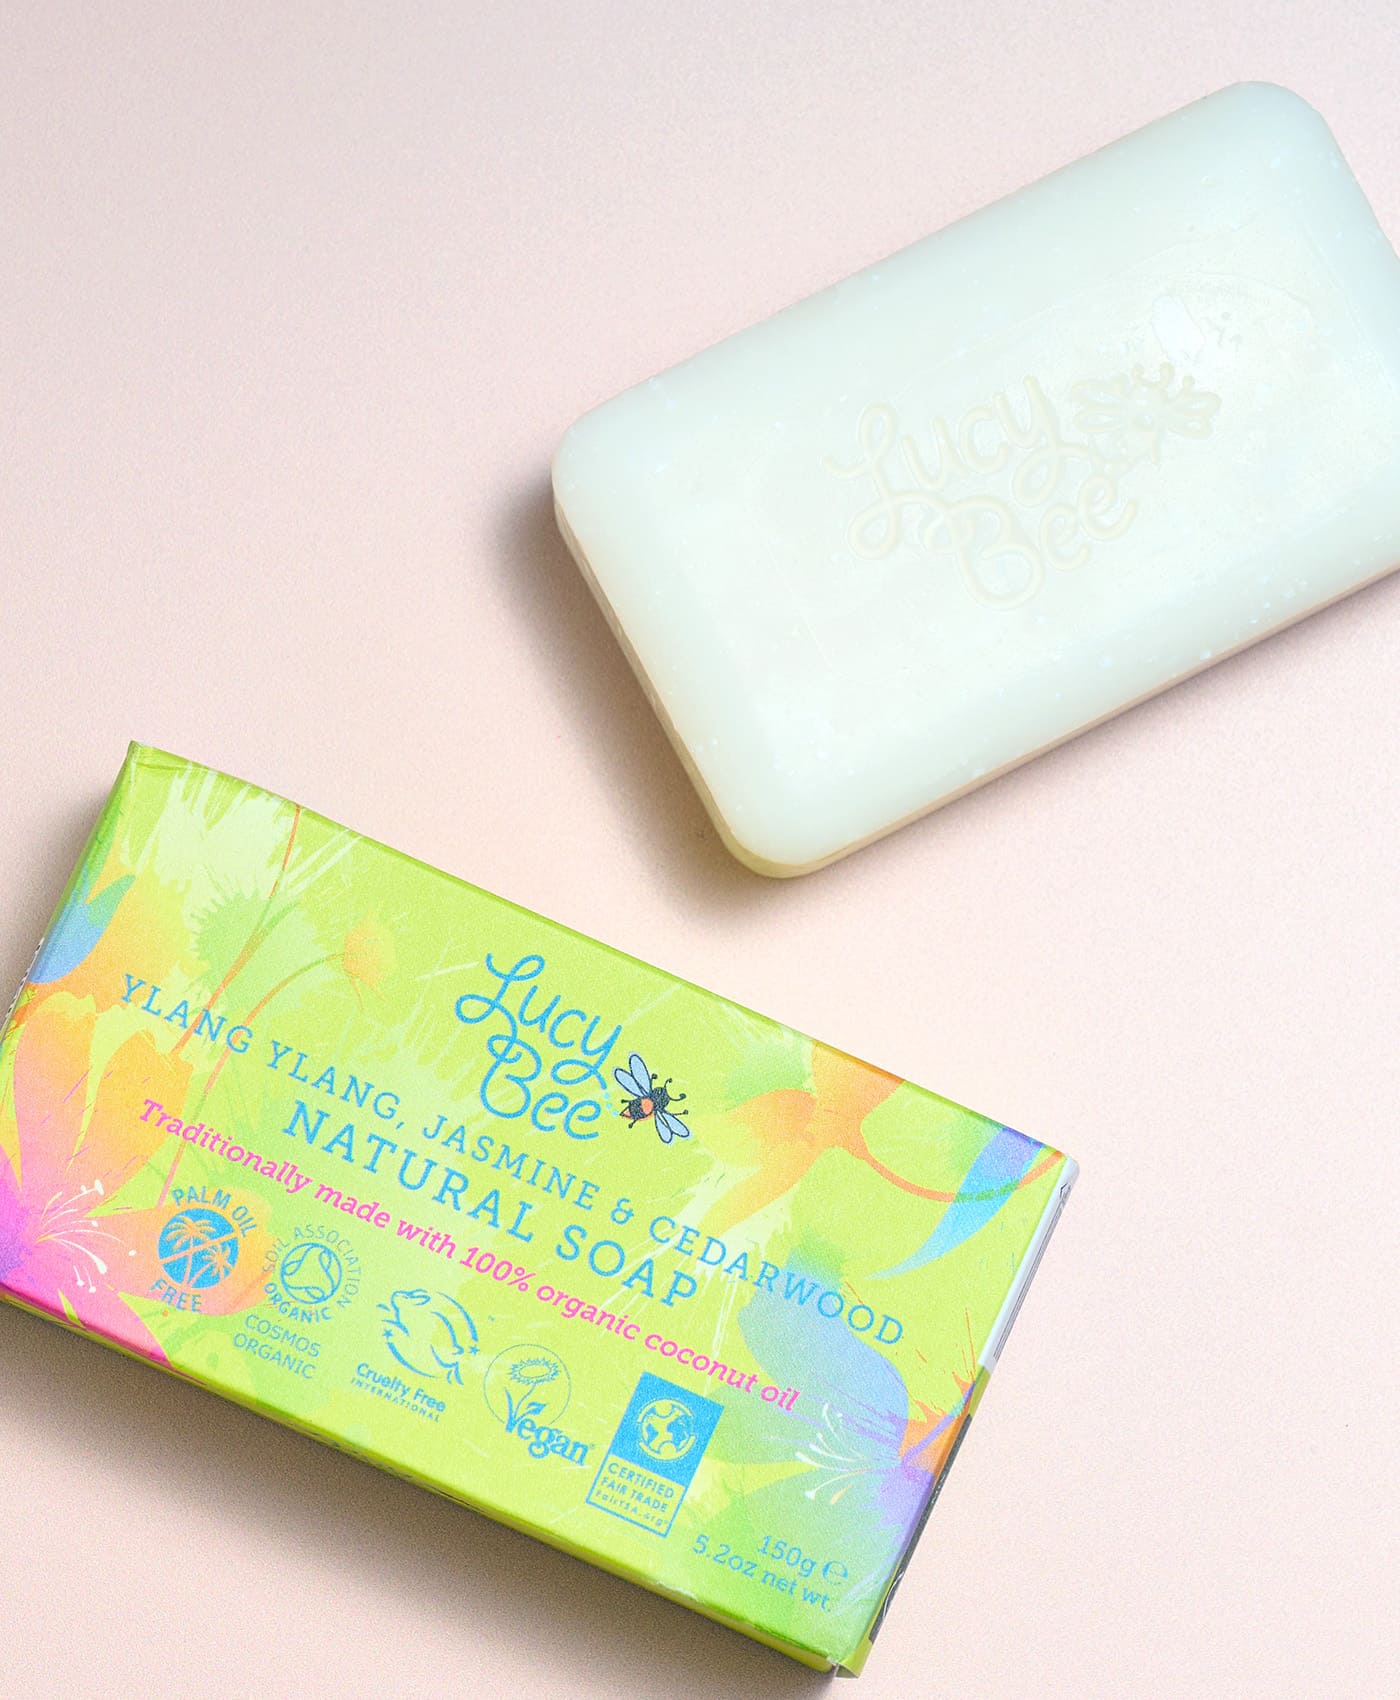 Organic soap for sensitive skin by lucy bee